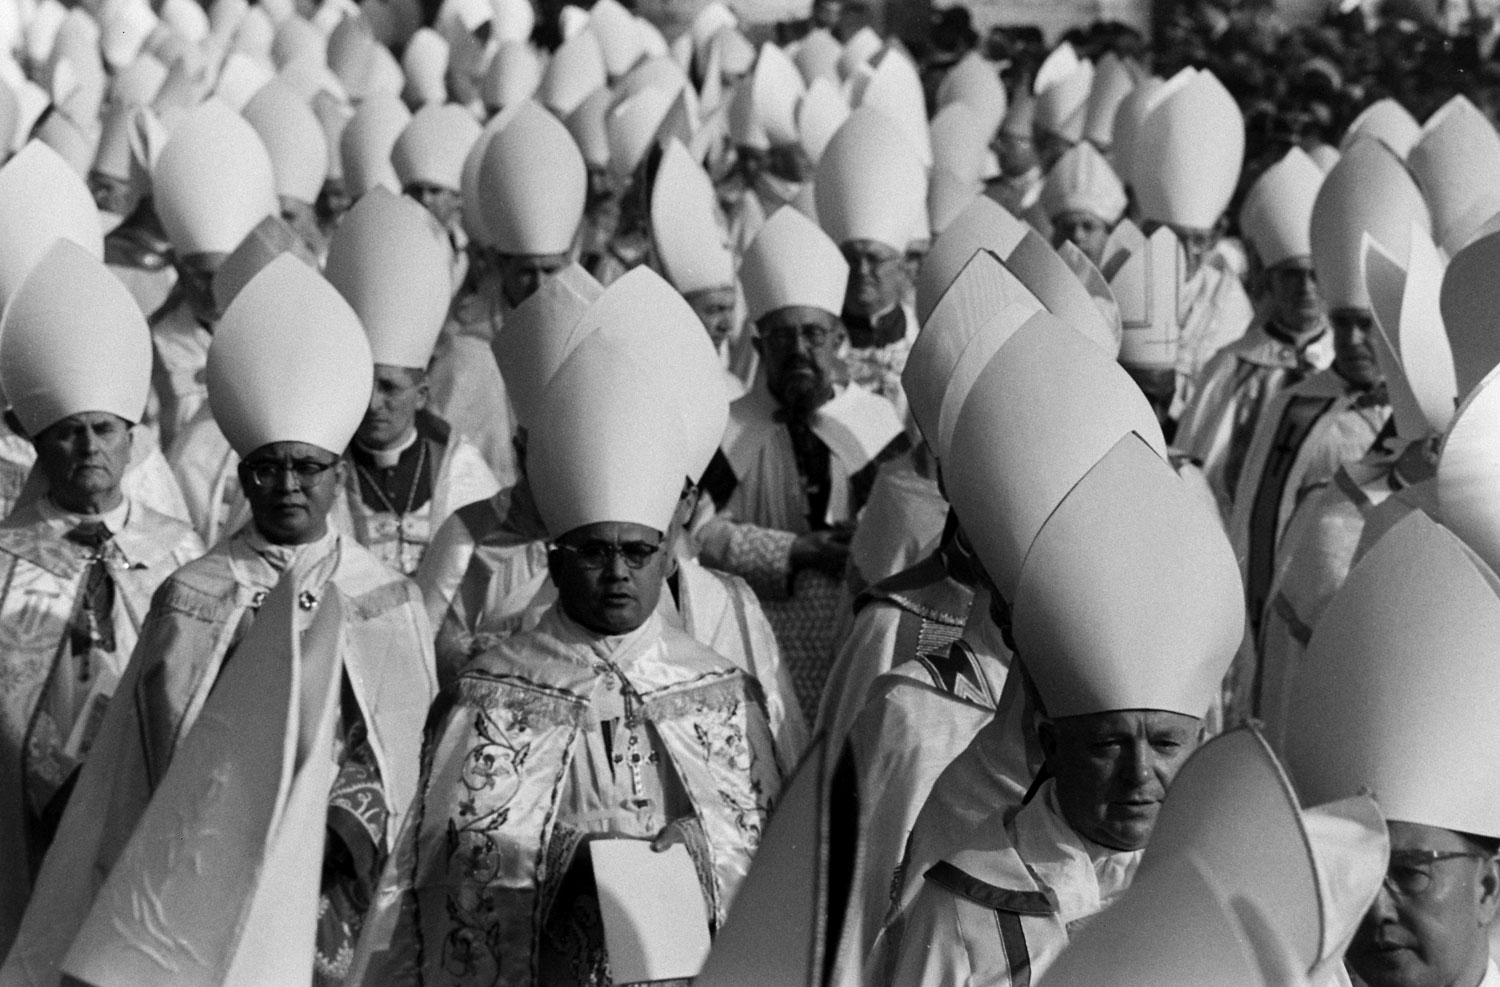 Vatican Ecumenical Council and Ecumenical Procession, Rome, 1962.